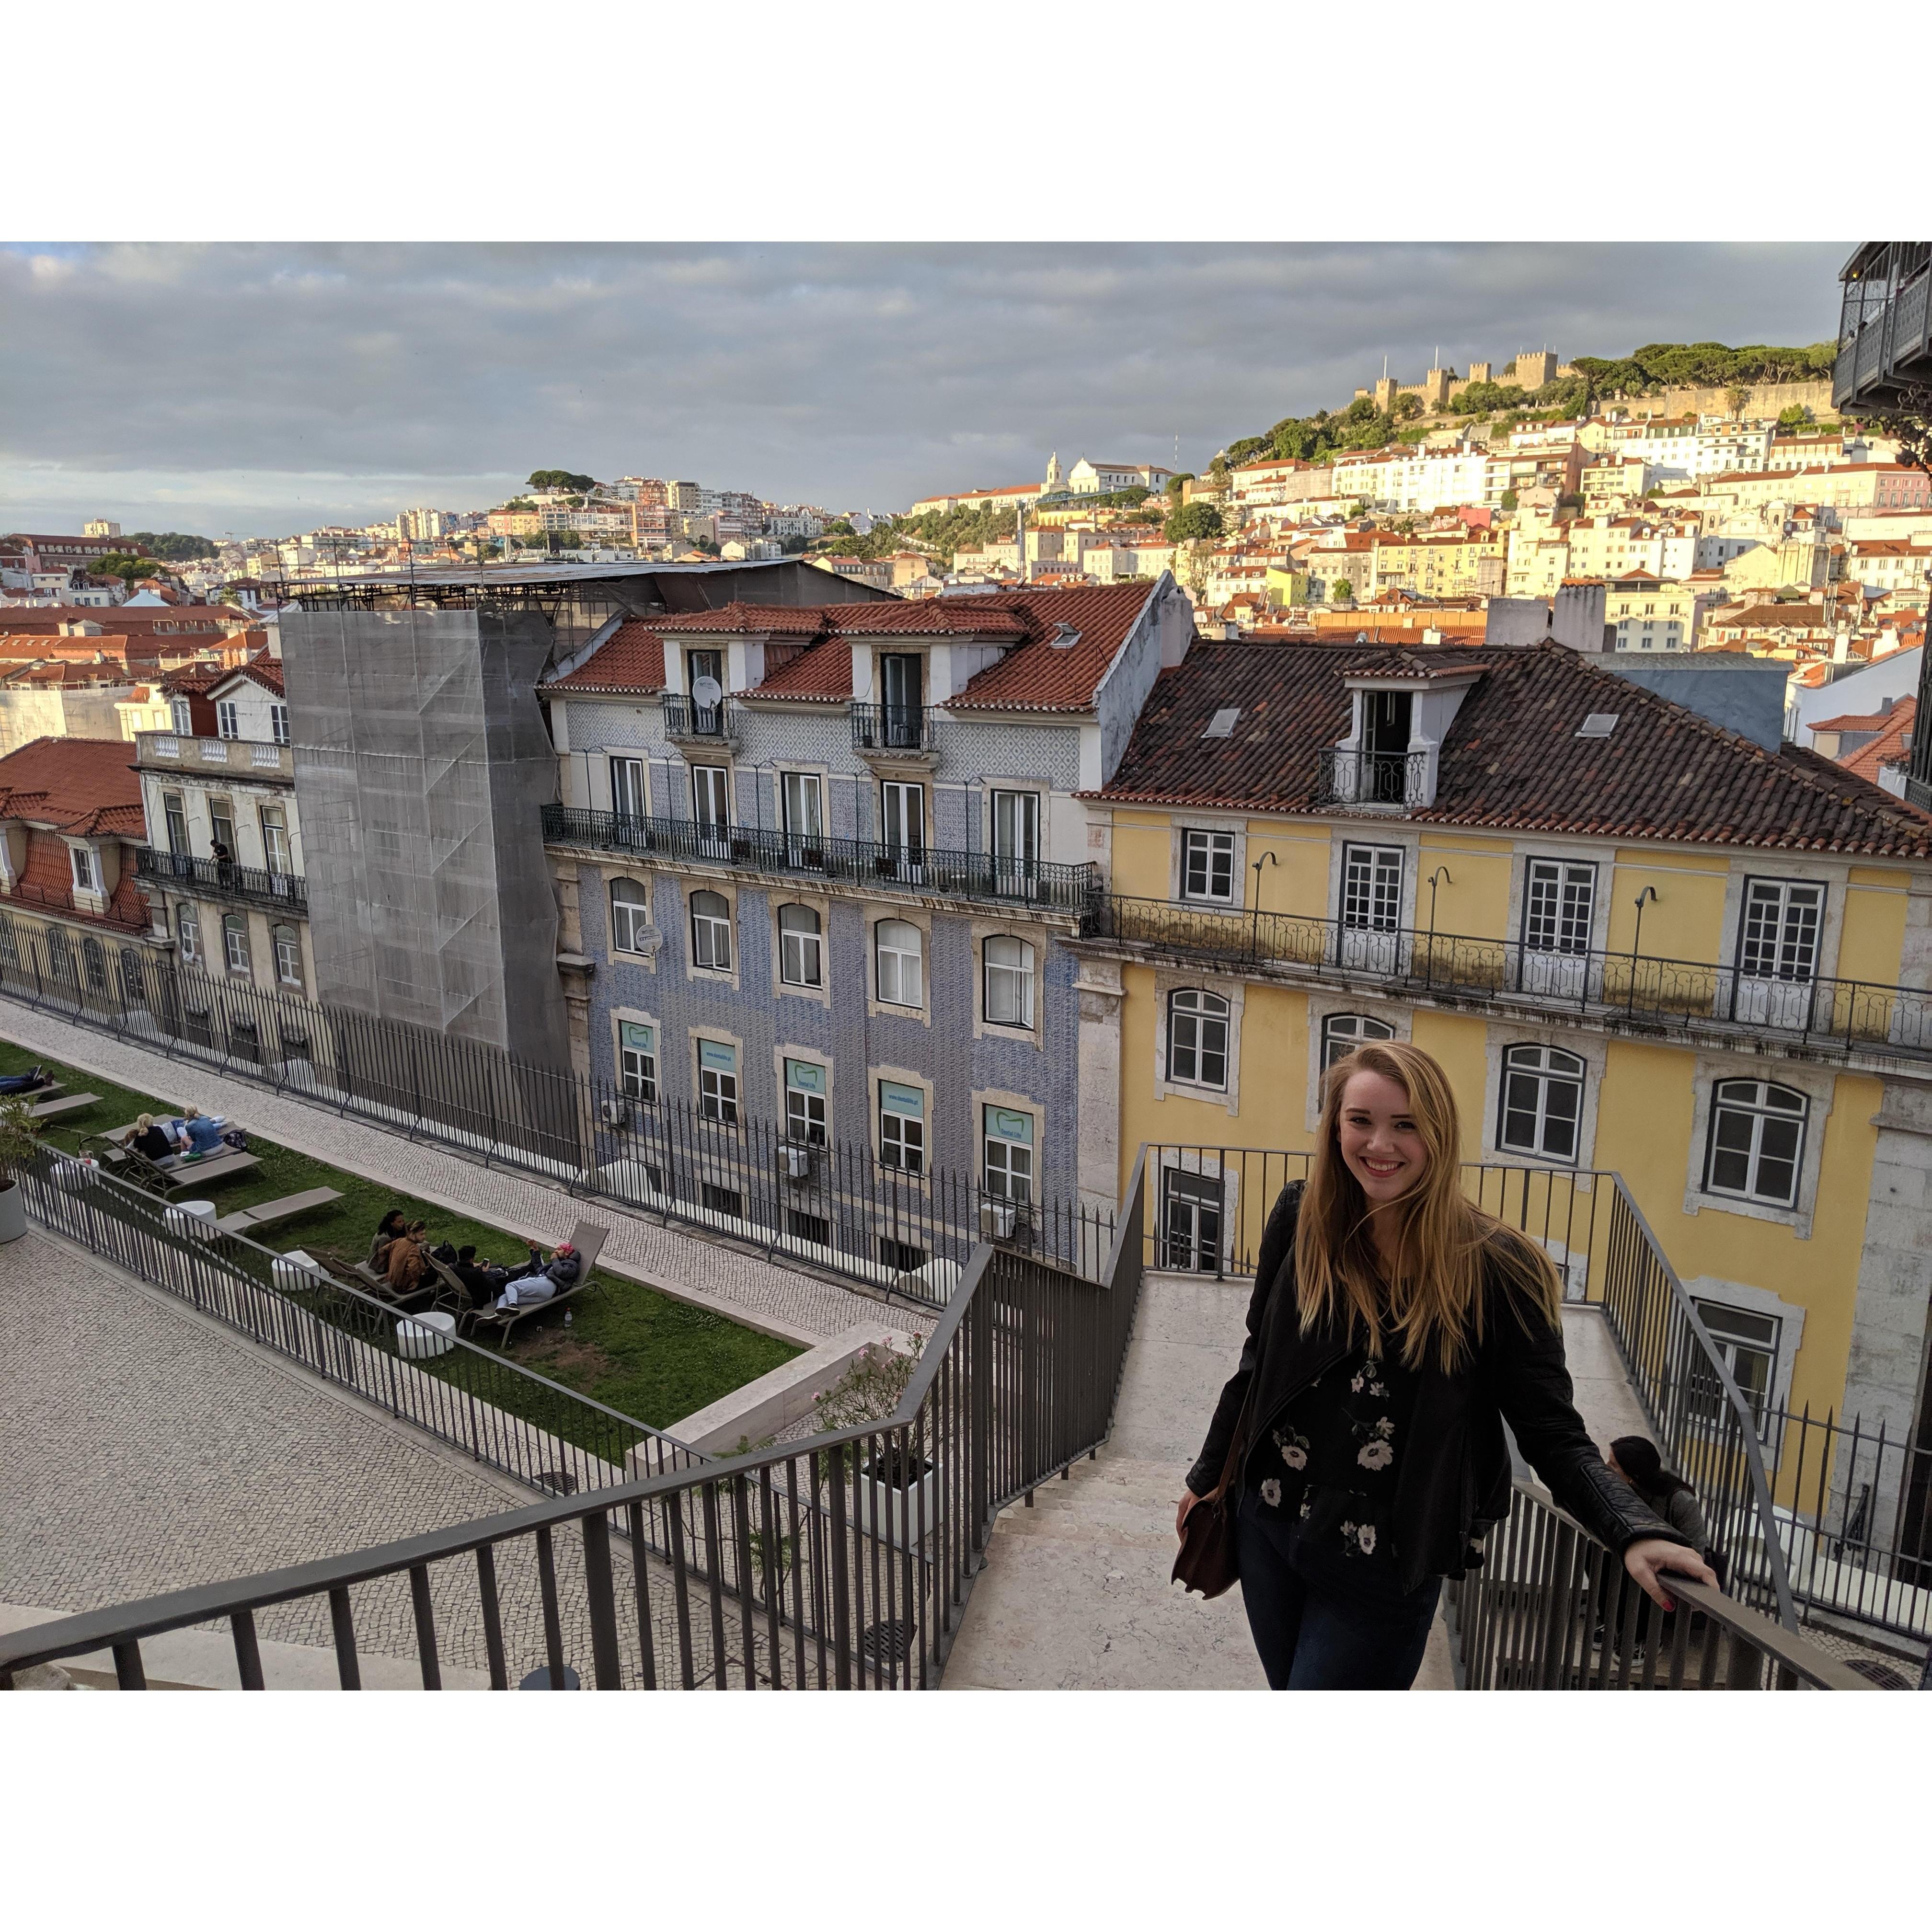 It seems you can't go anywhere that doesn't have a gorgeous view in Lisbon. Can you spot the castle?